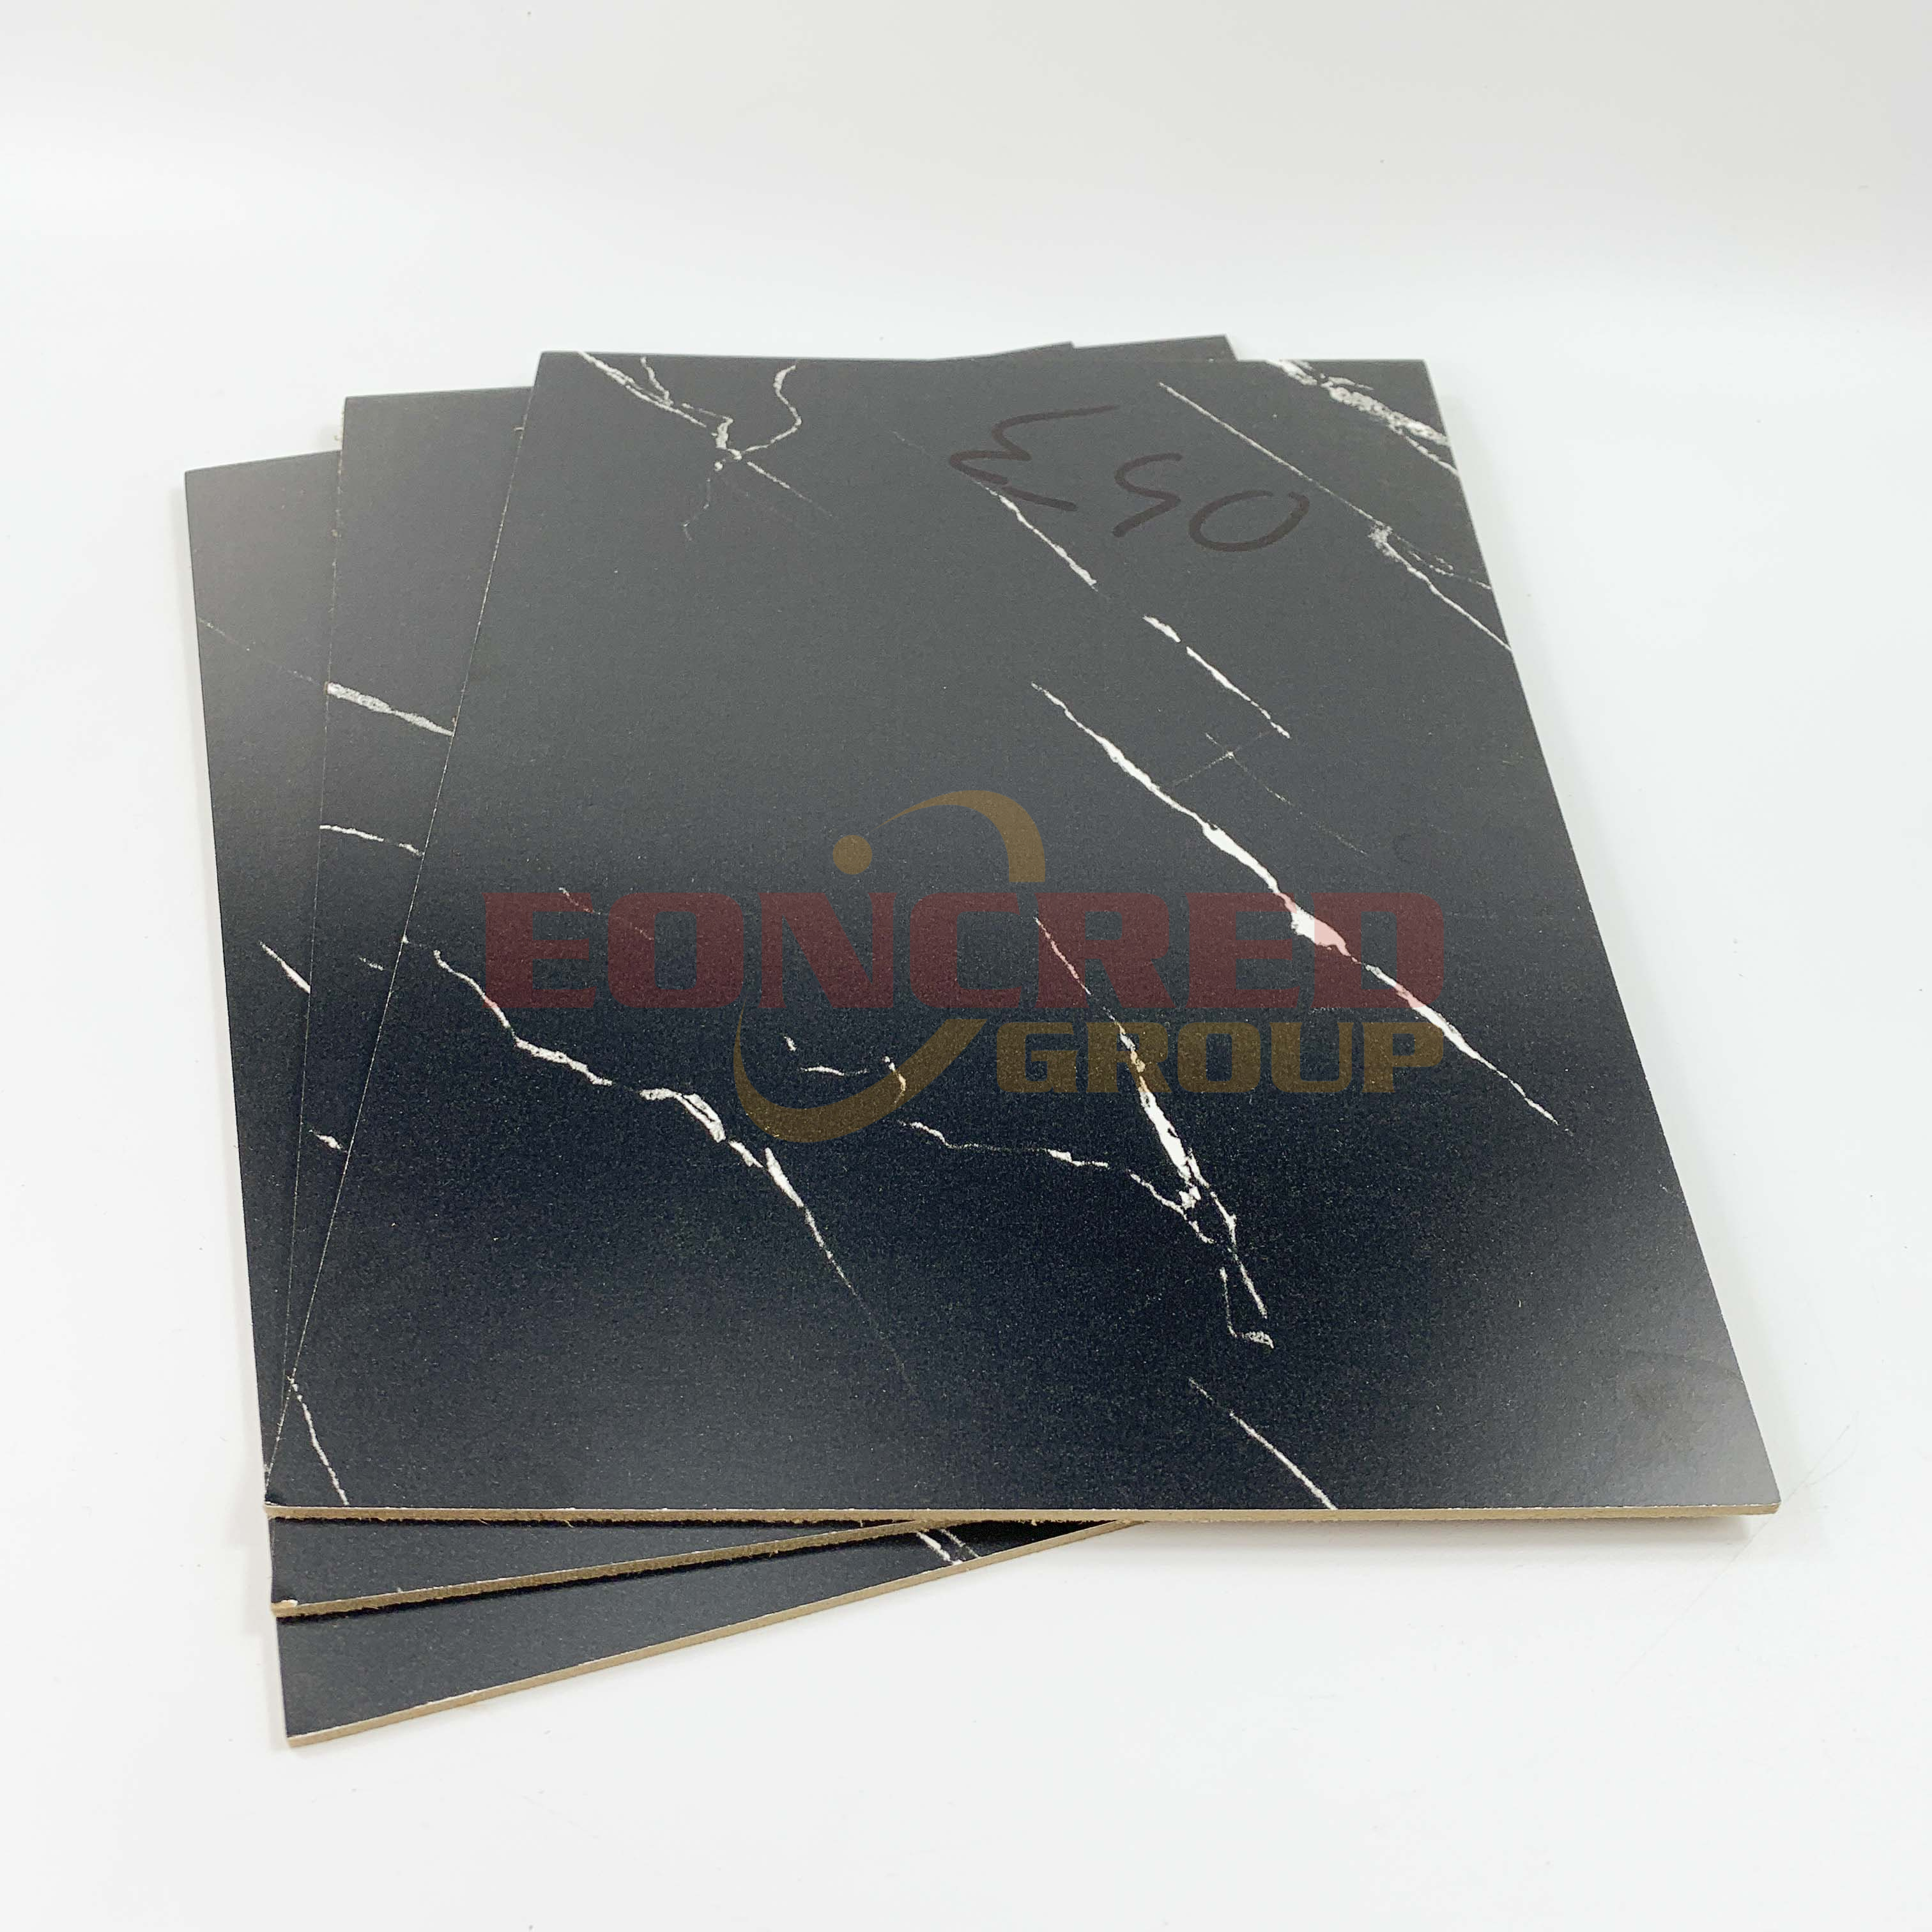 hot sale 15mm black film faced plywood/ construction plywood/marine plywood